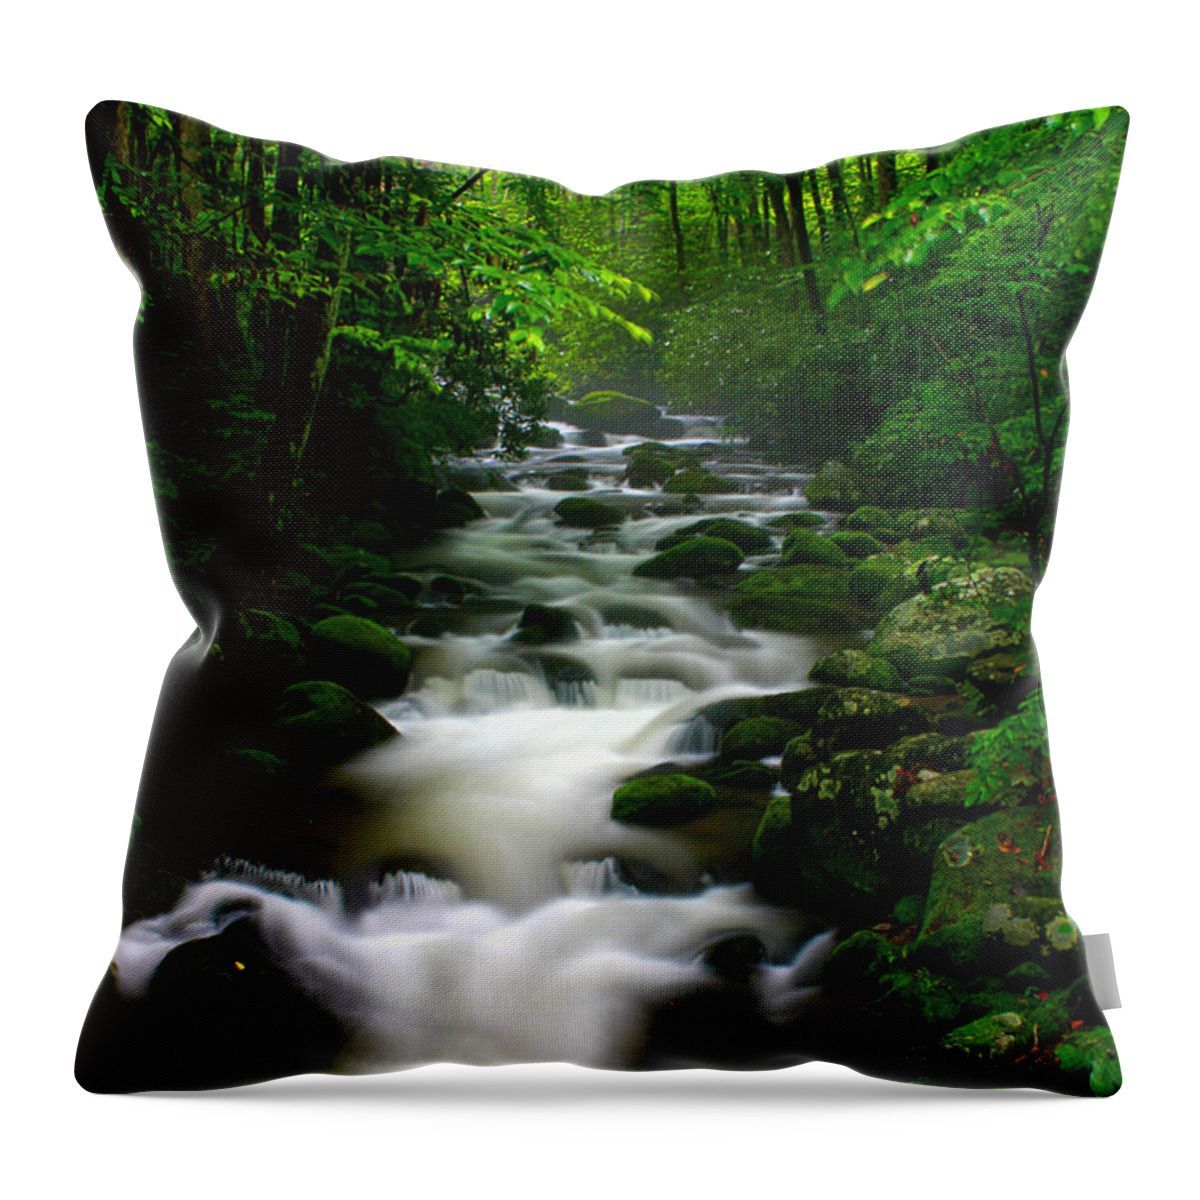 Nunweiler Throw Pillow featuring the photograph Escape by Nunweiler Photography